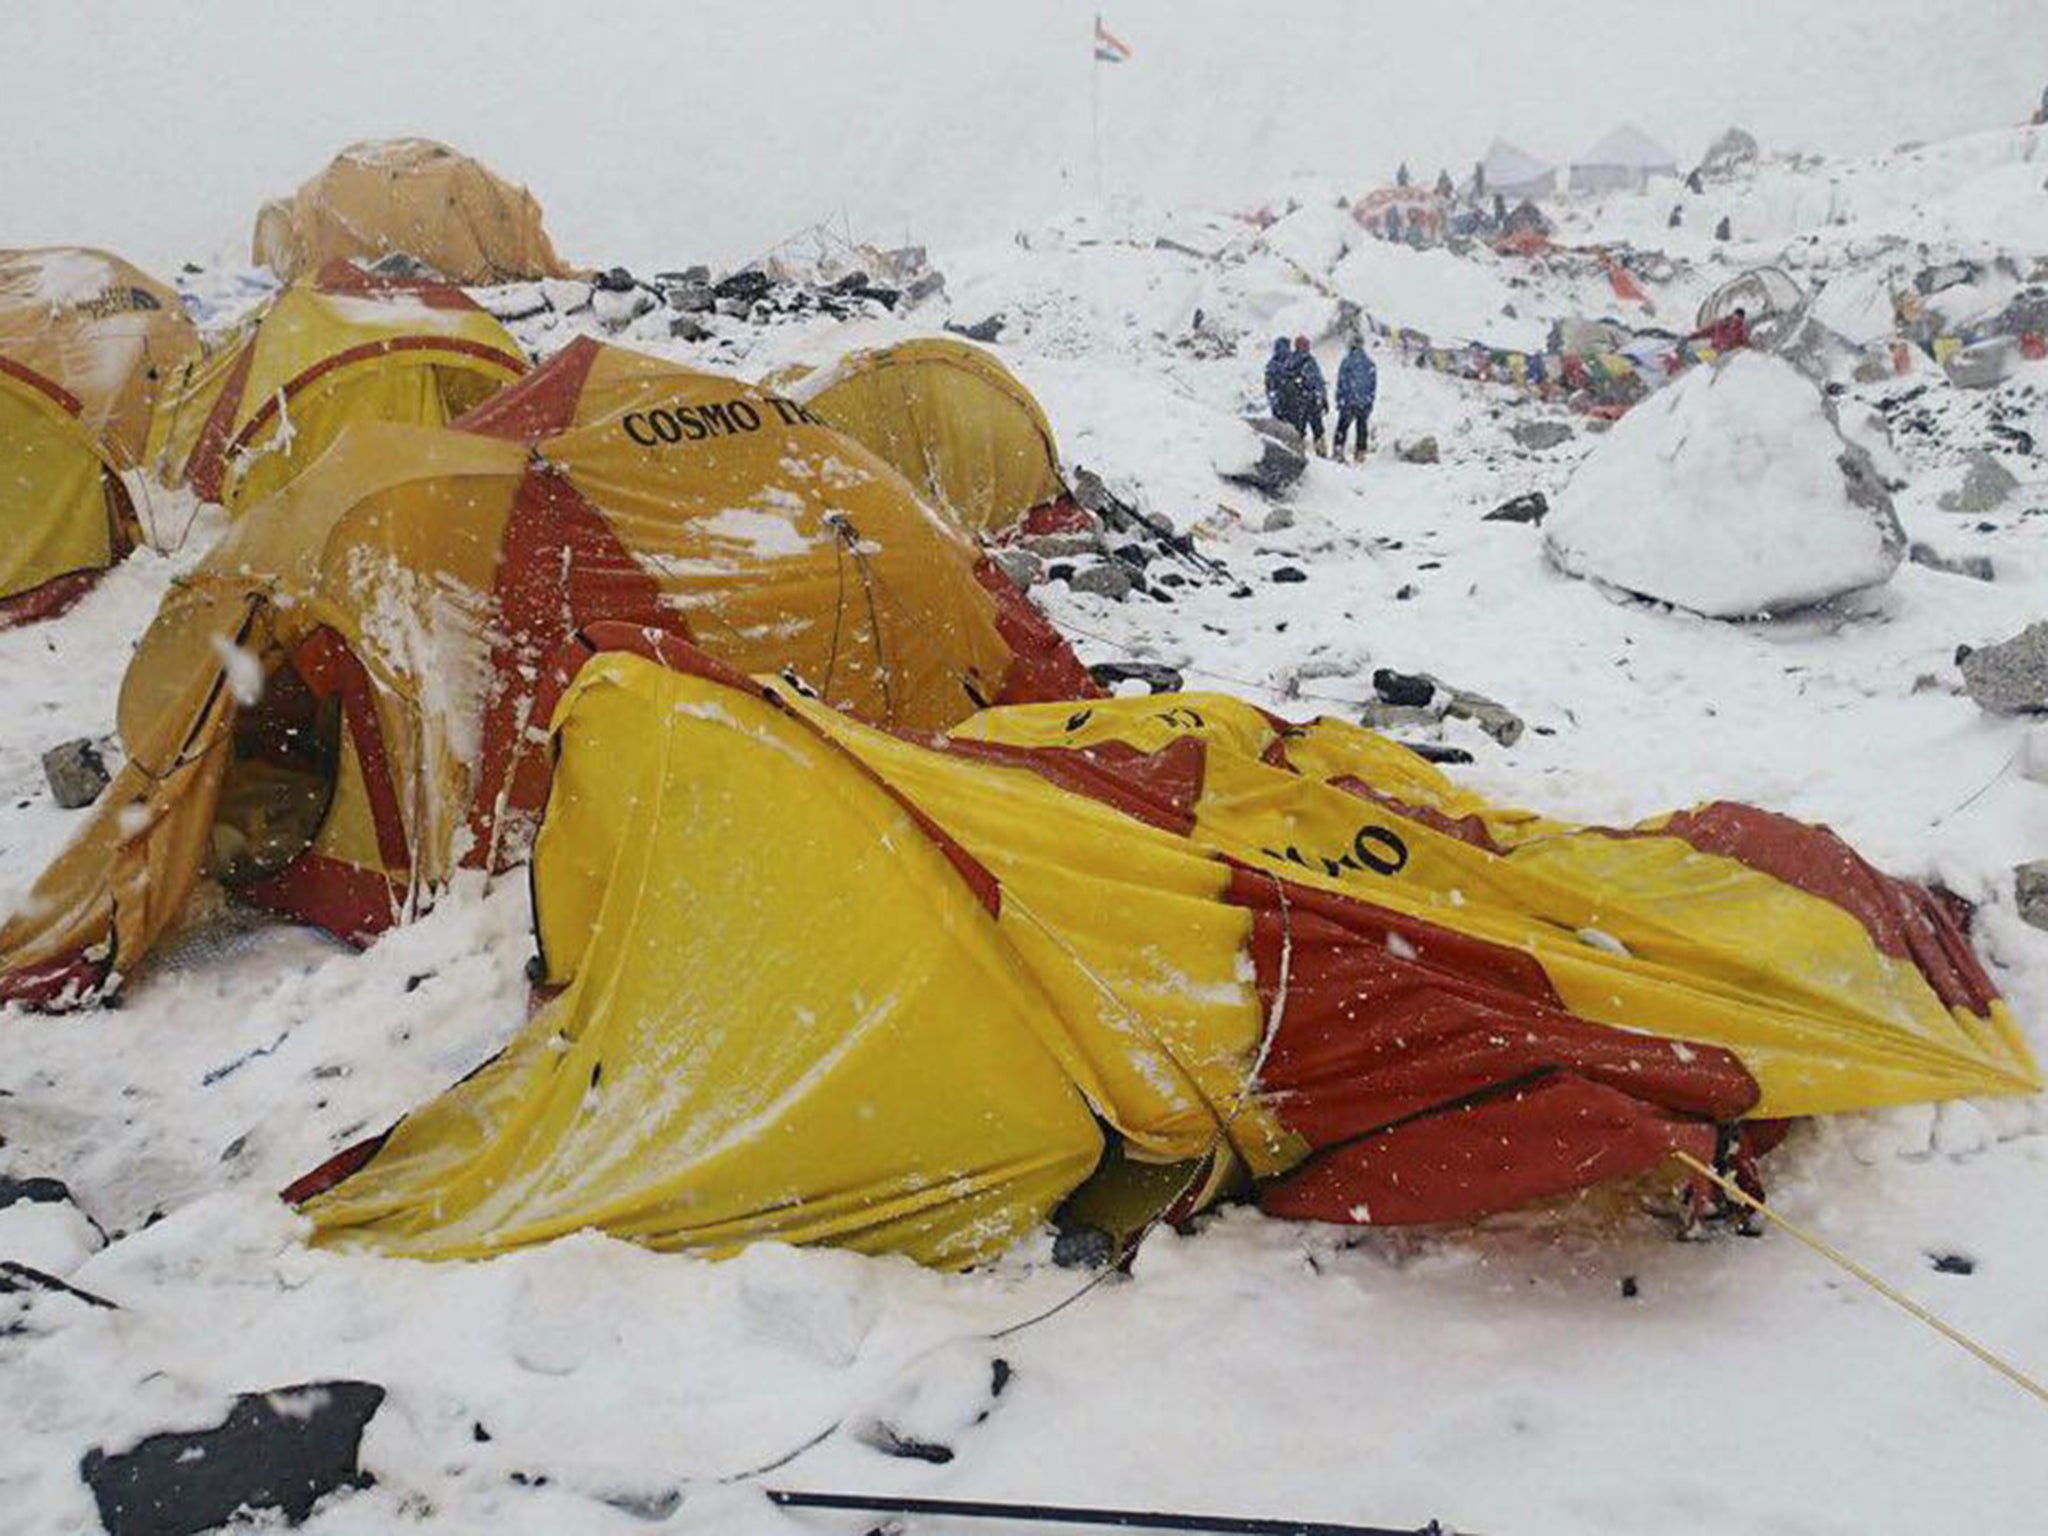 Mount Everest base camp after the avalanche (AP)